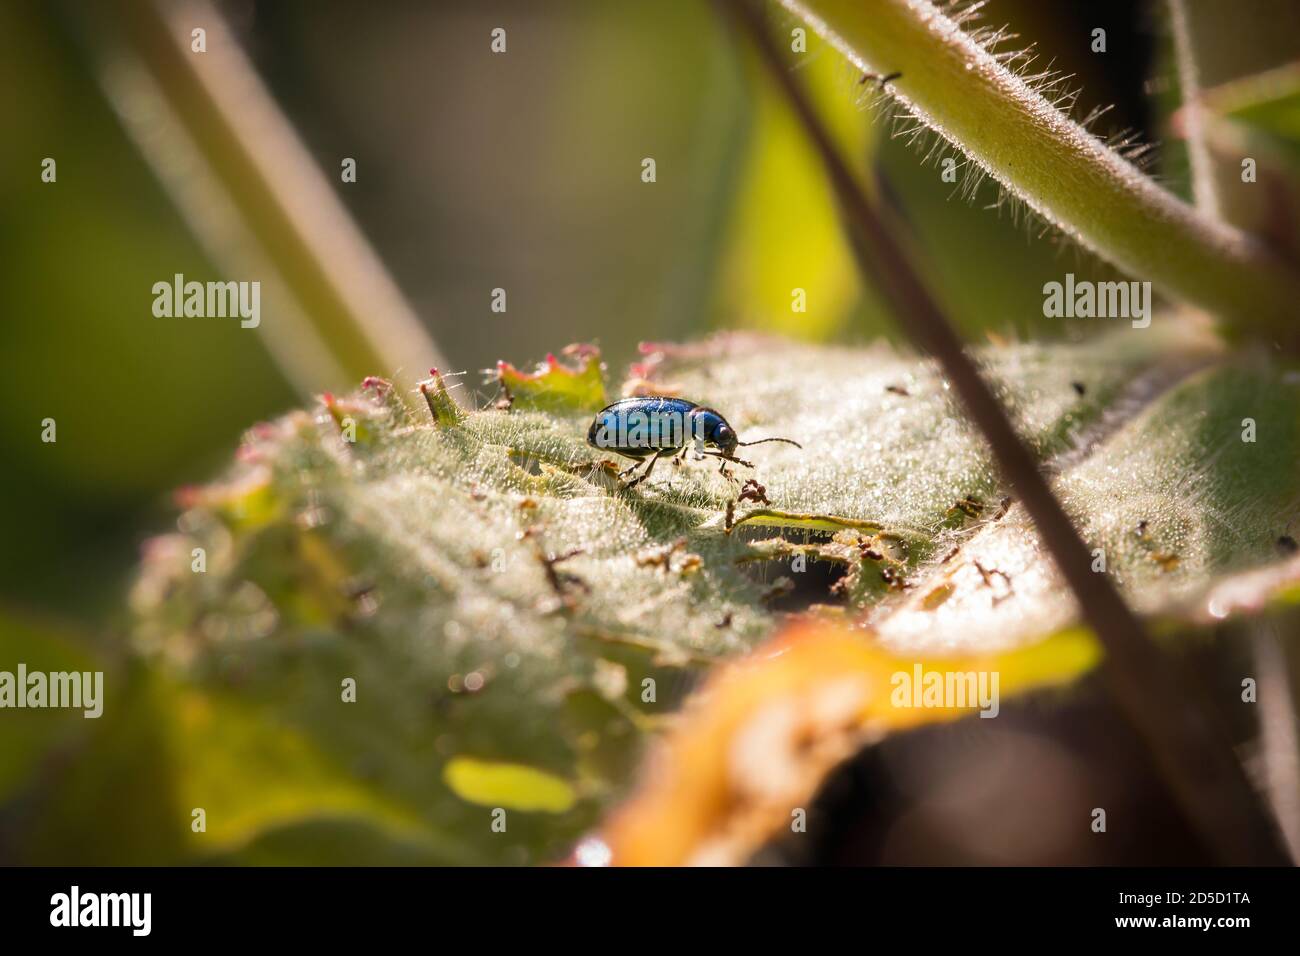 A small blue beetle crawling across a leaf in the morning sunshine Stock Photo